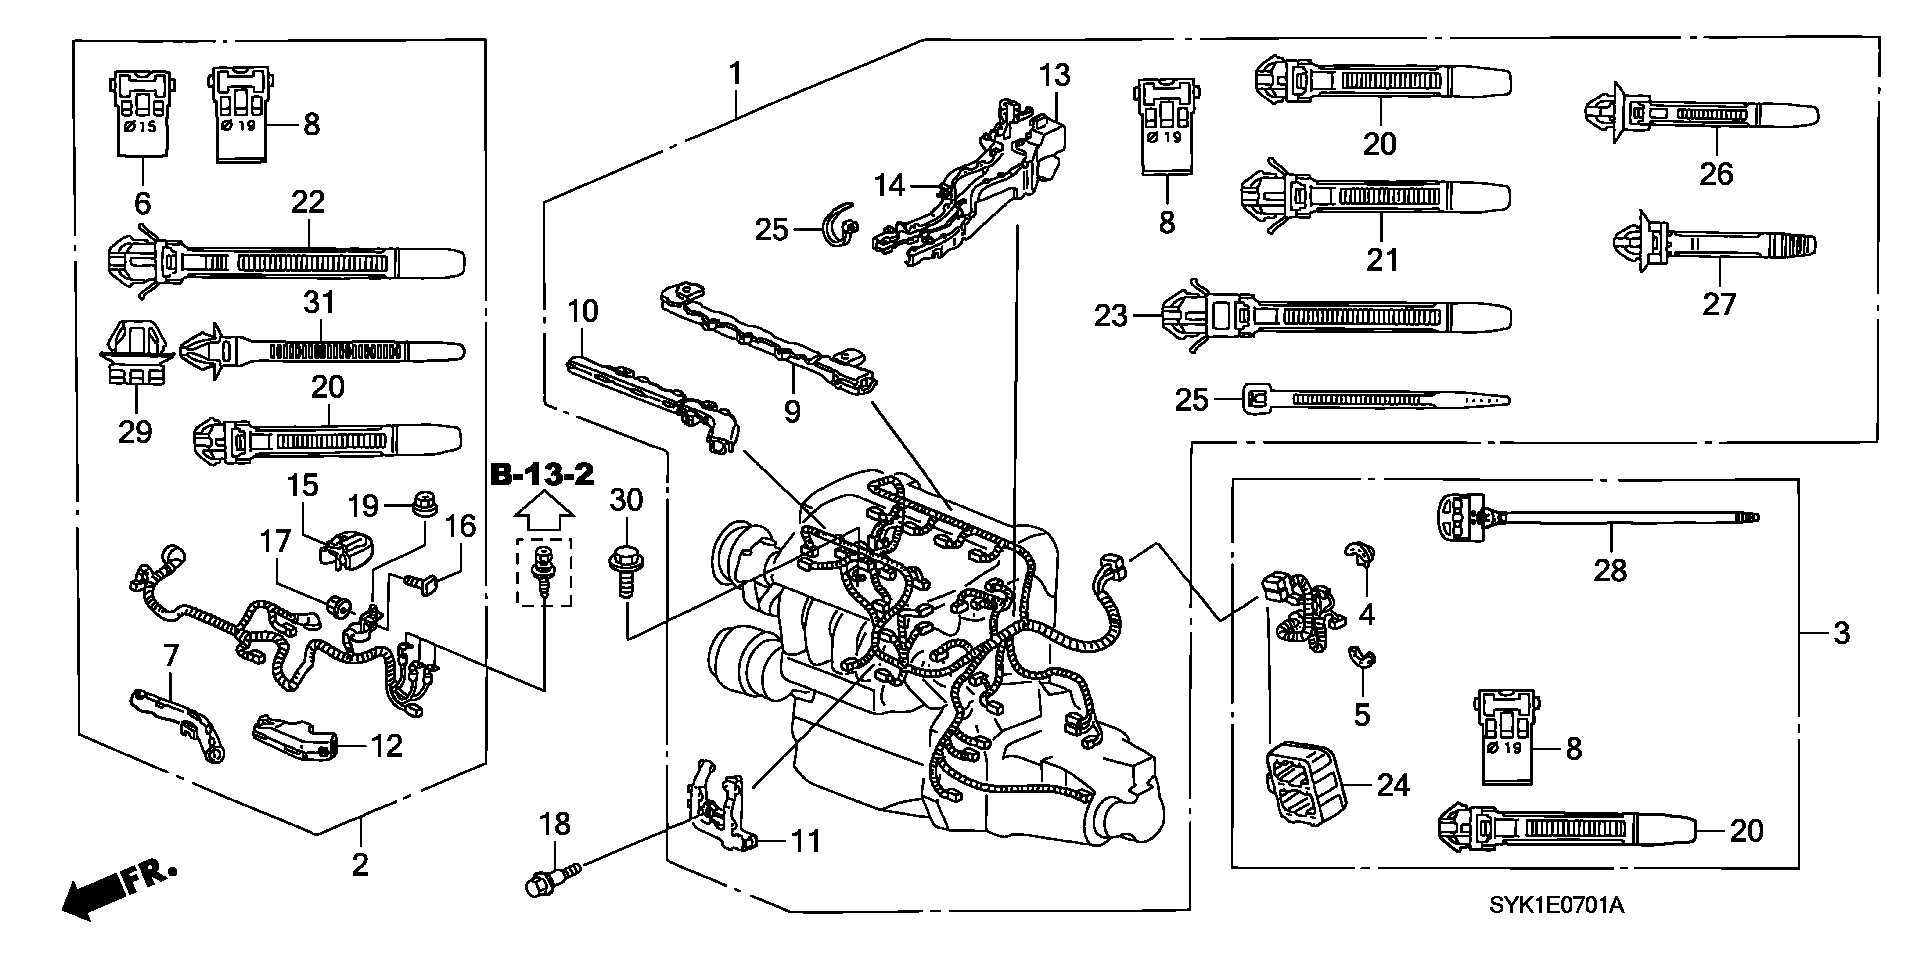 ENGINE WIRE HARNESS(L4)